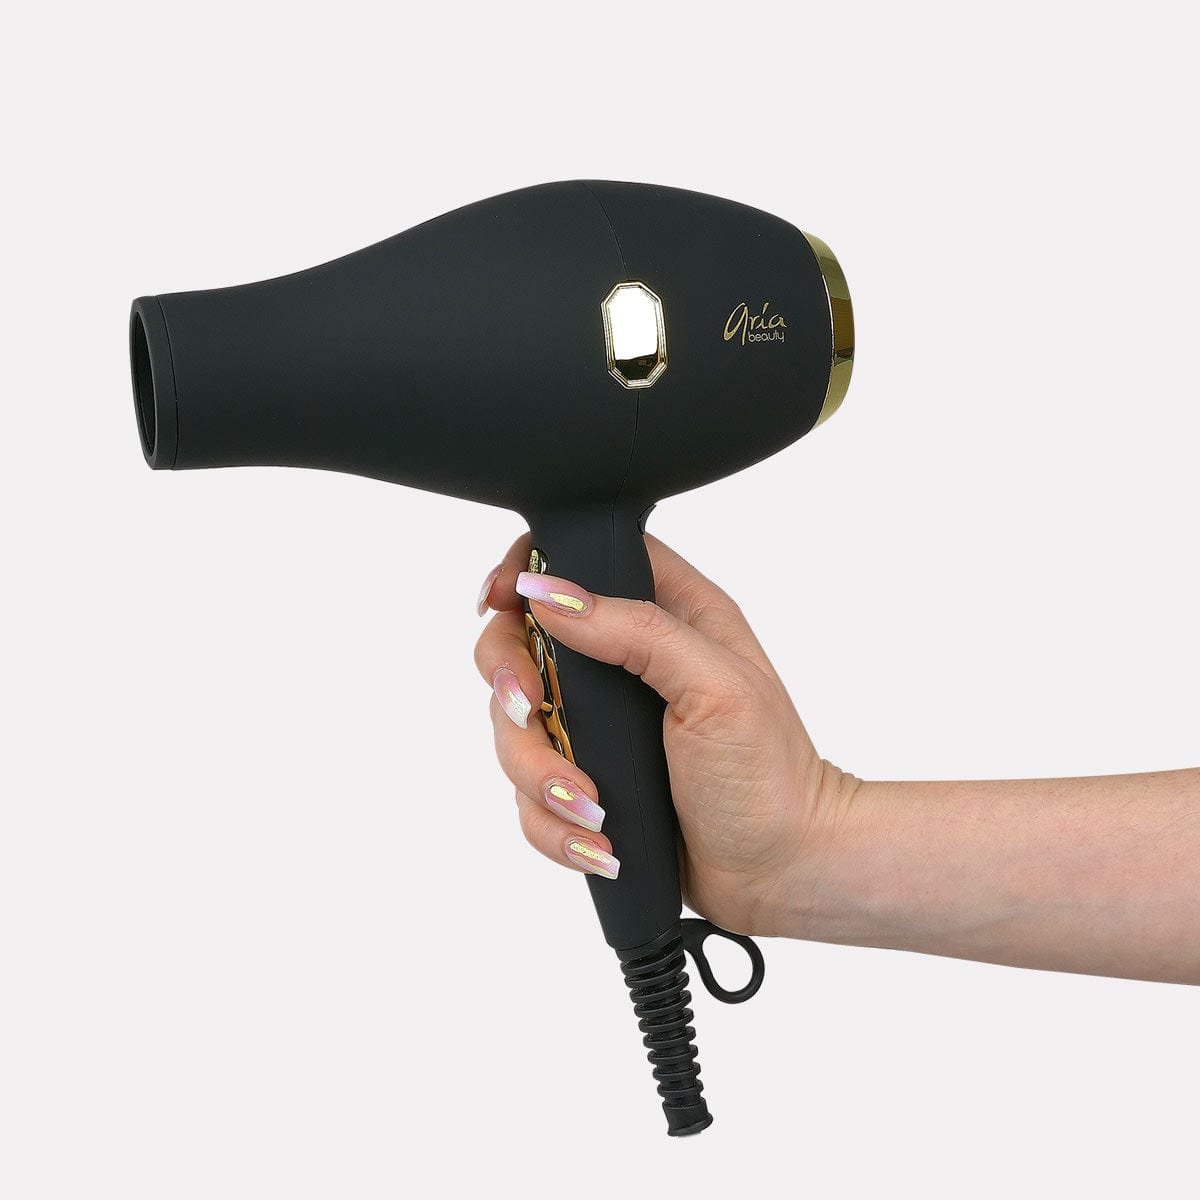 What Is An Infrared Hair Dryer